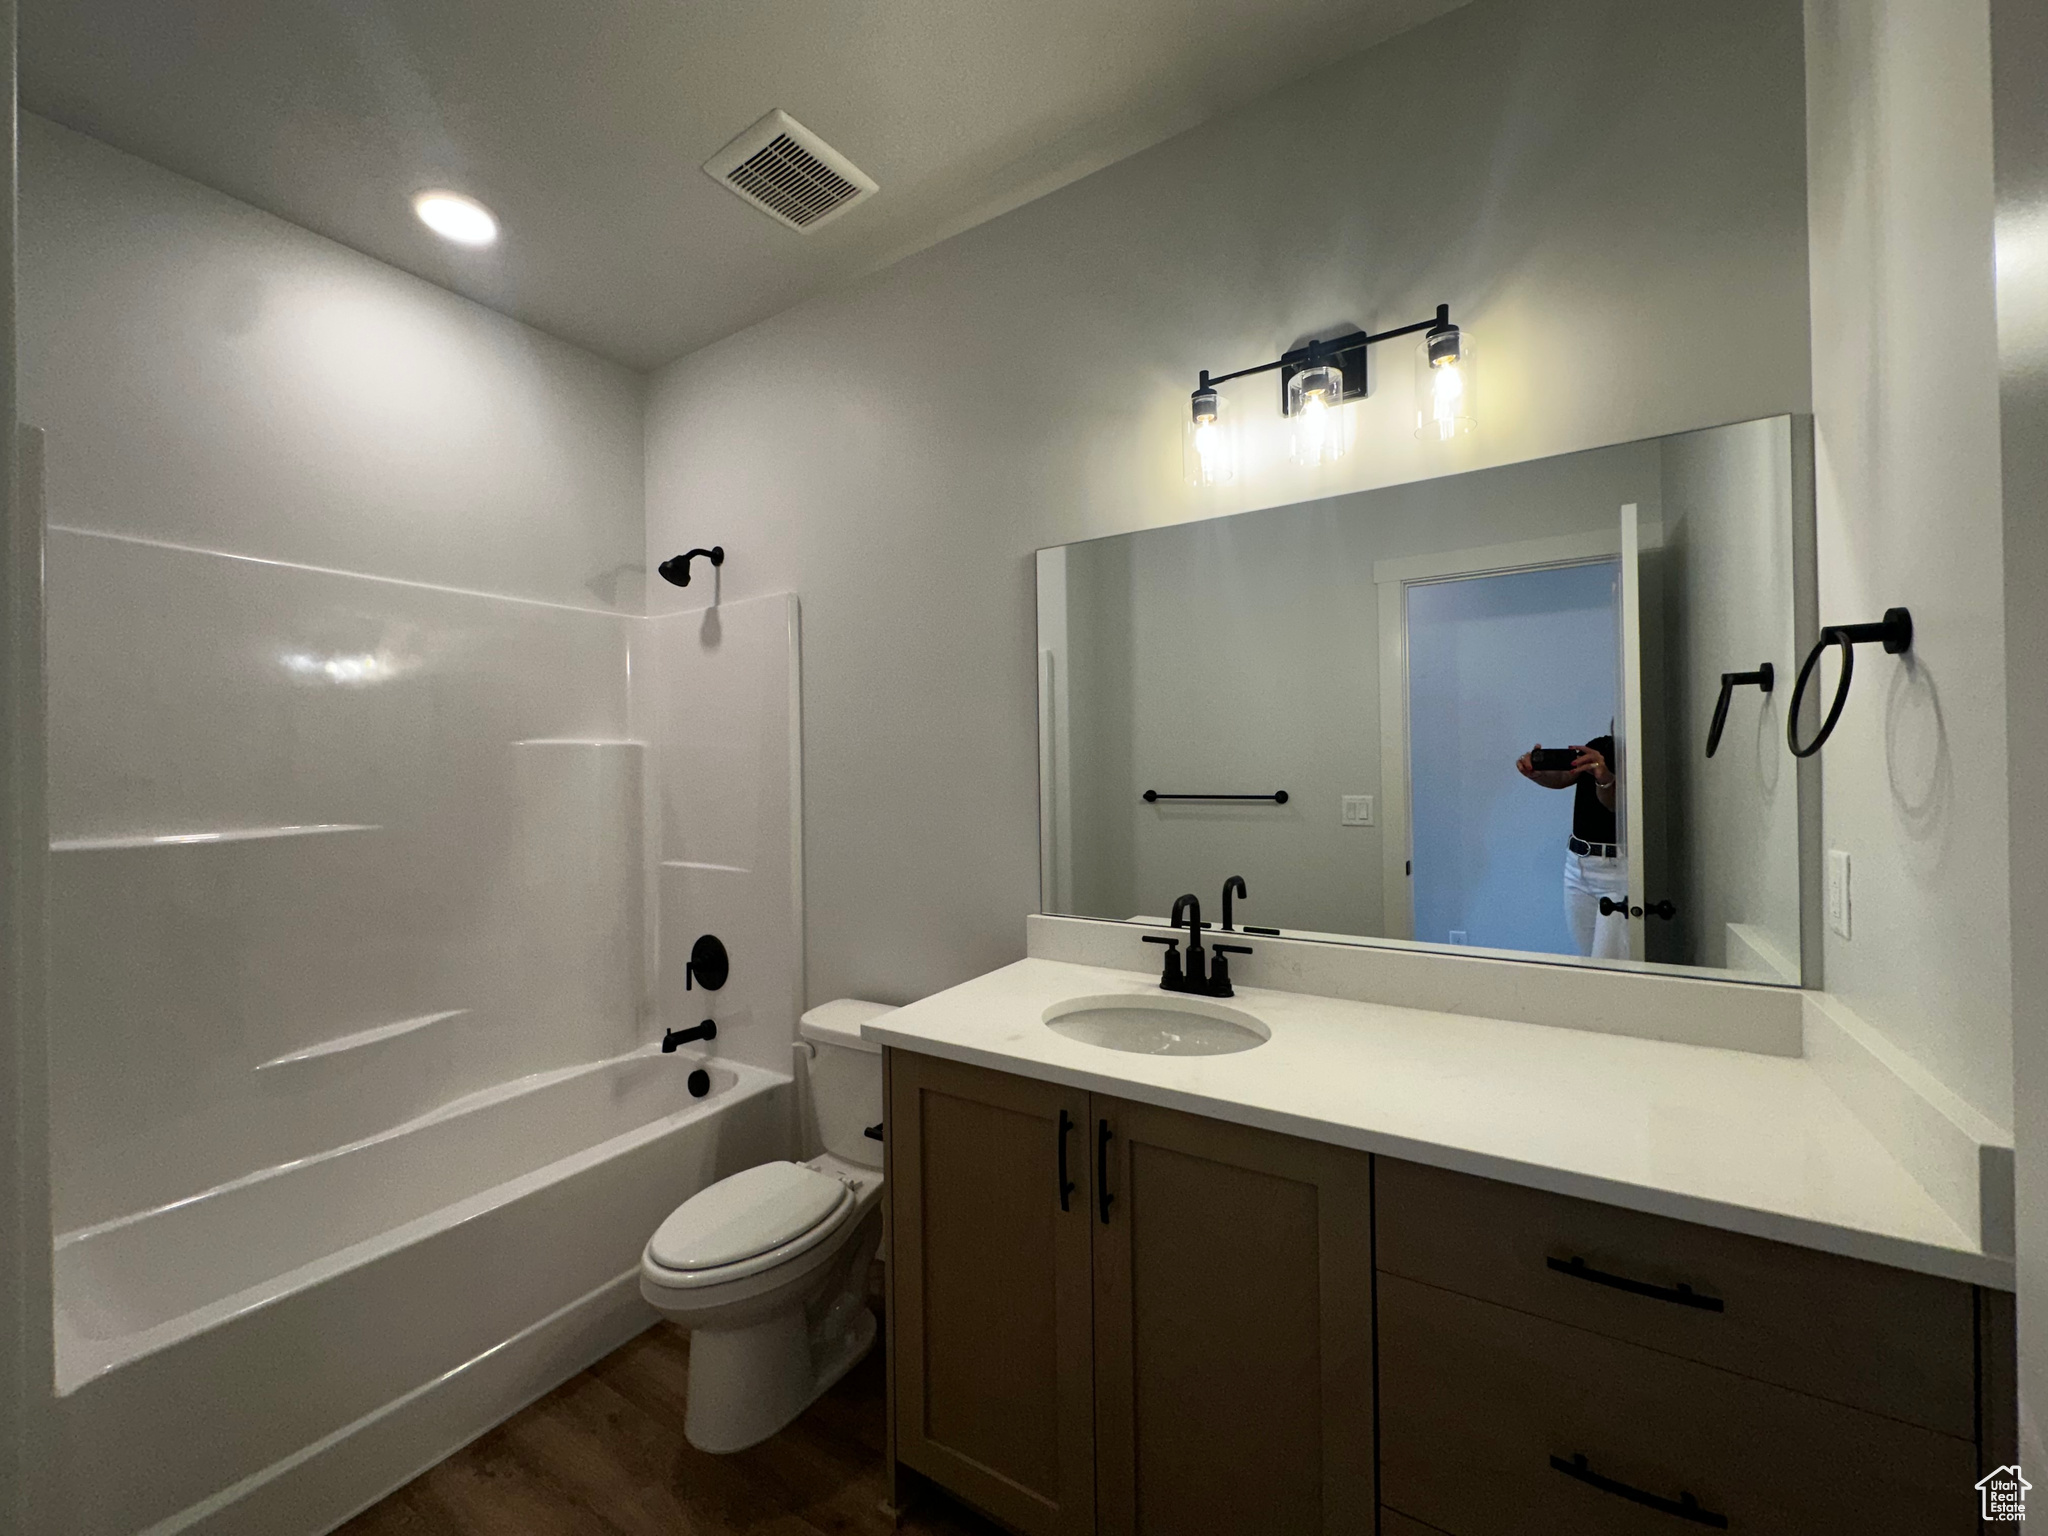 Full bathroom with wood-type flooring, shower / bath combination, vanity with extensive cabinet space, and toilet